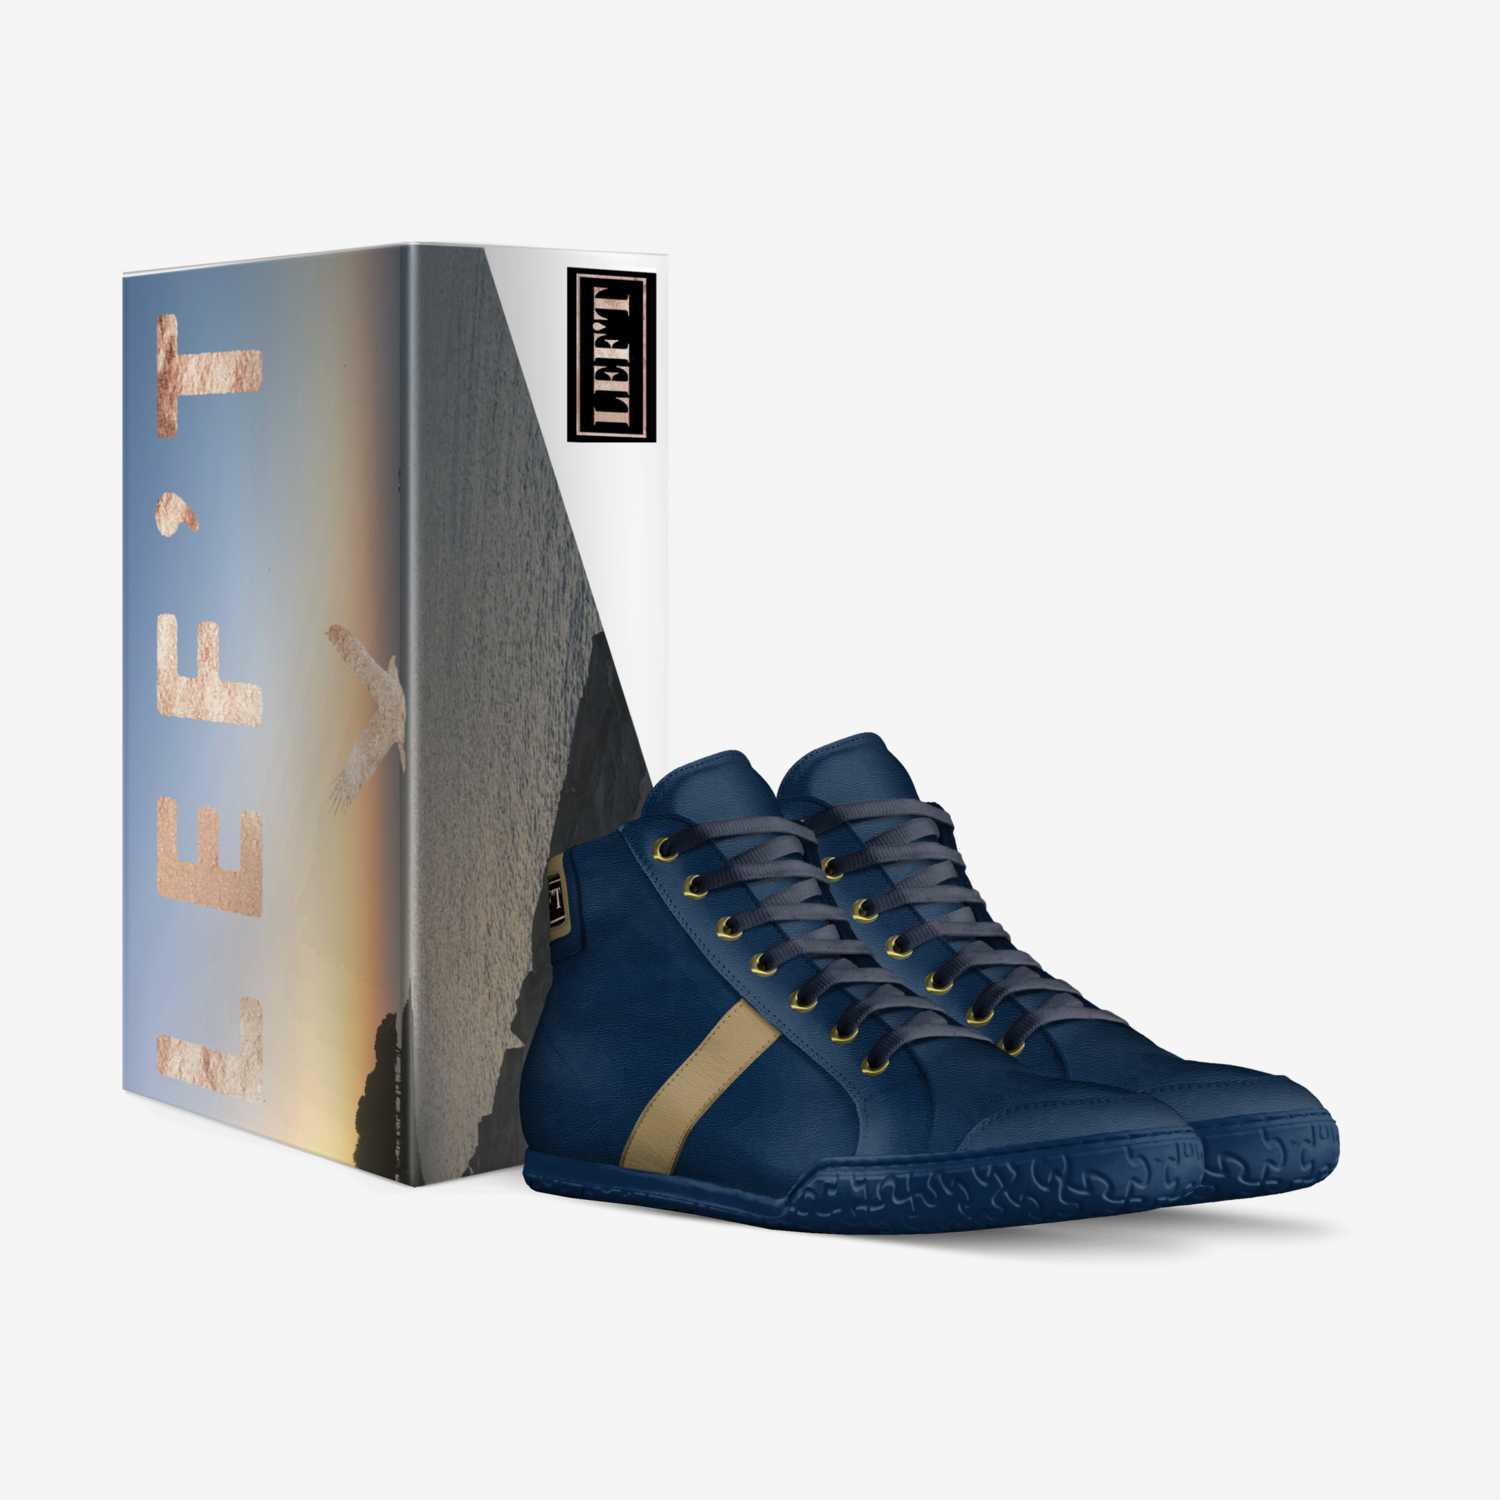 L1 custom made in Italy shoes by Glyn Nelson | Box view